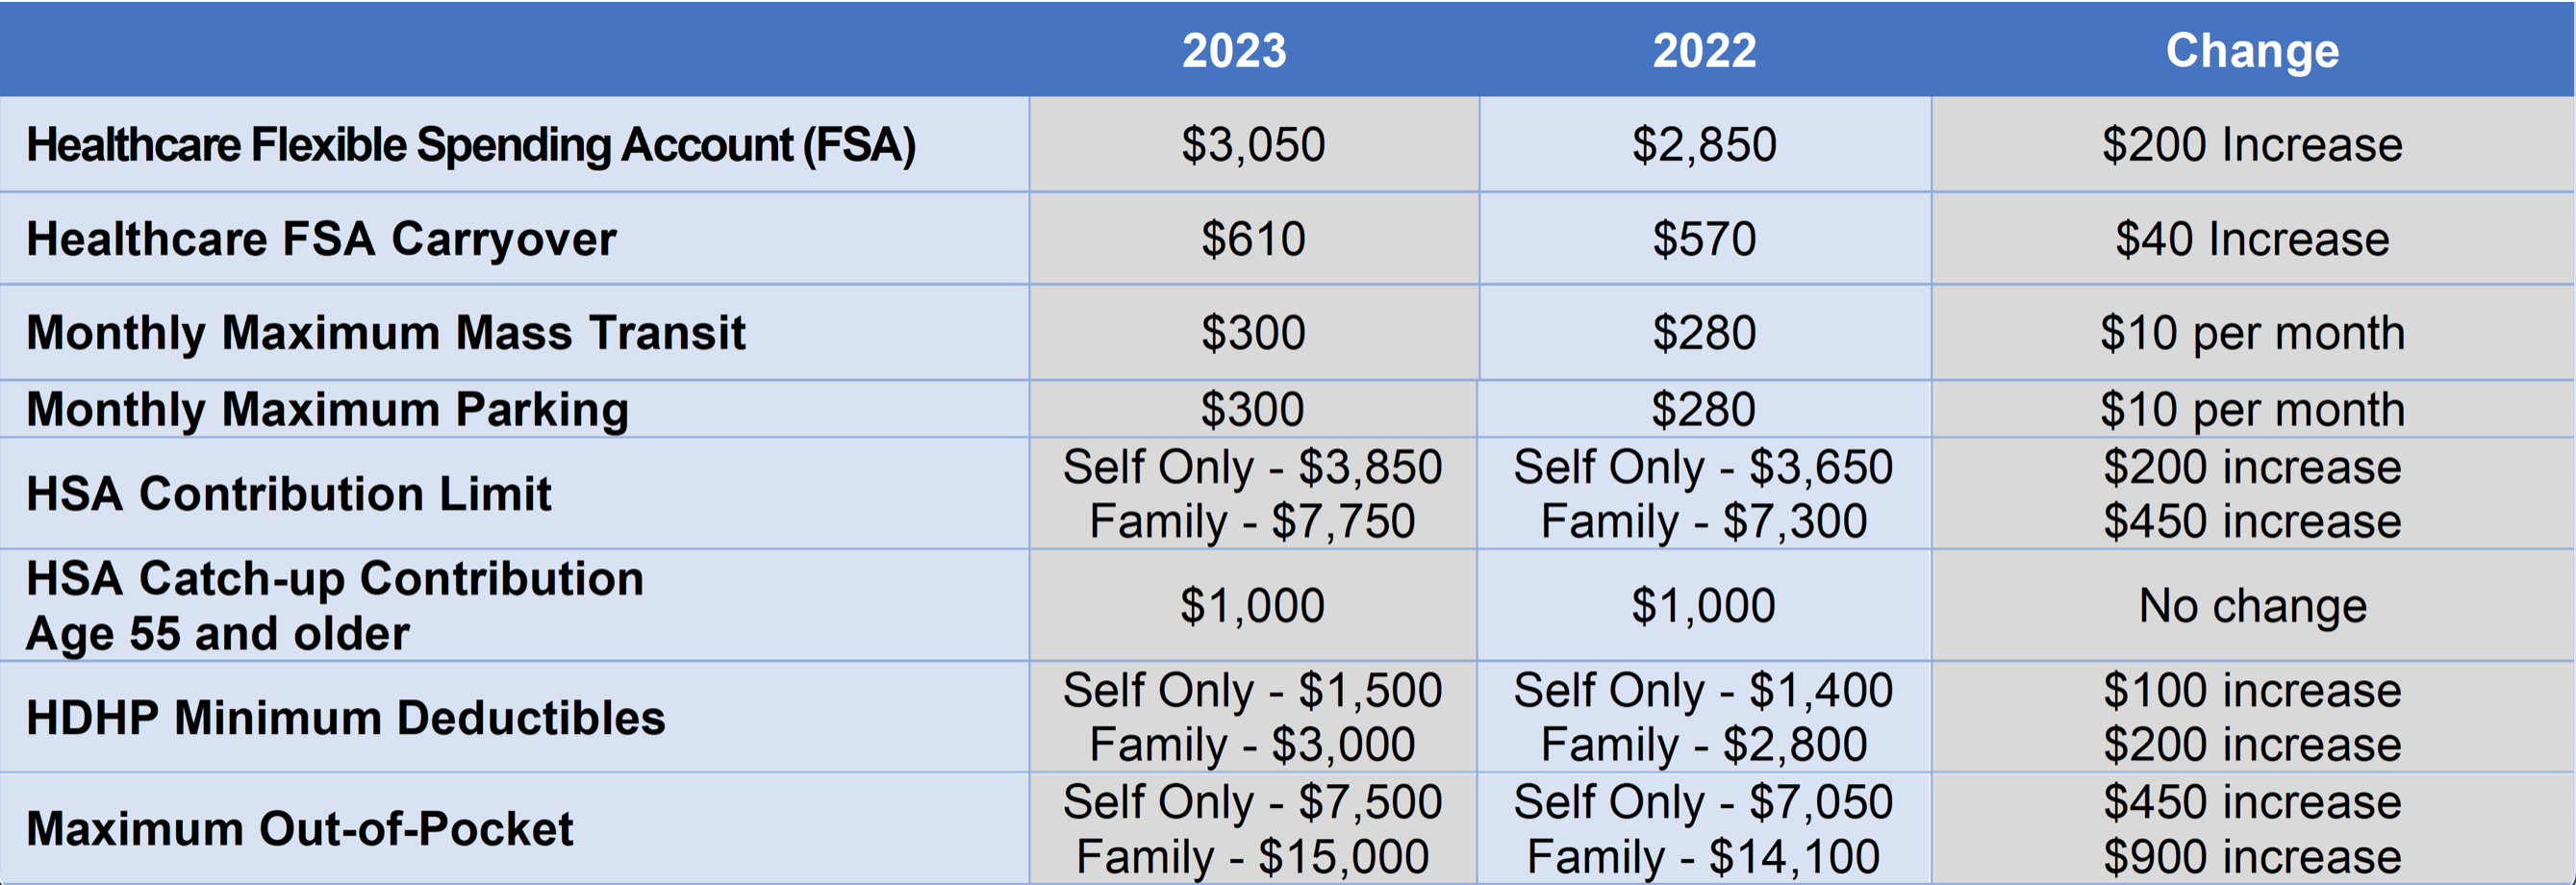 IRS Releases 2023 Limits for Flexible Spending Accounts (FSA), Health Savings Accounts (HSA) and